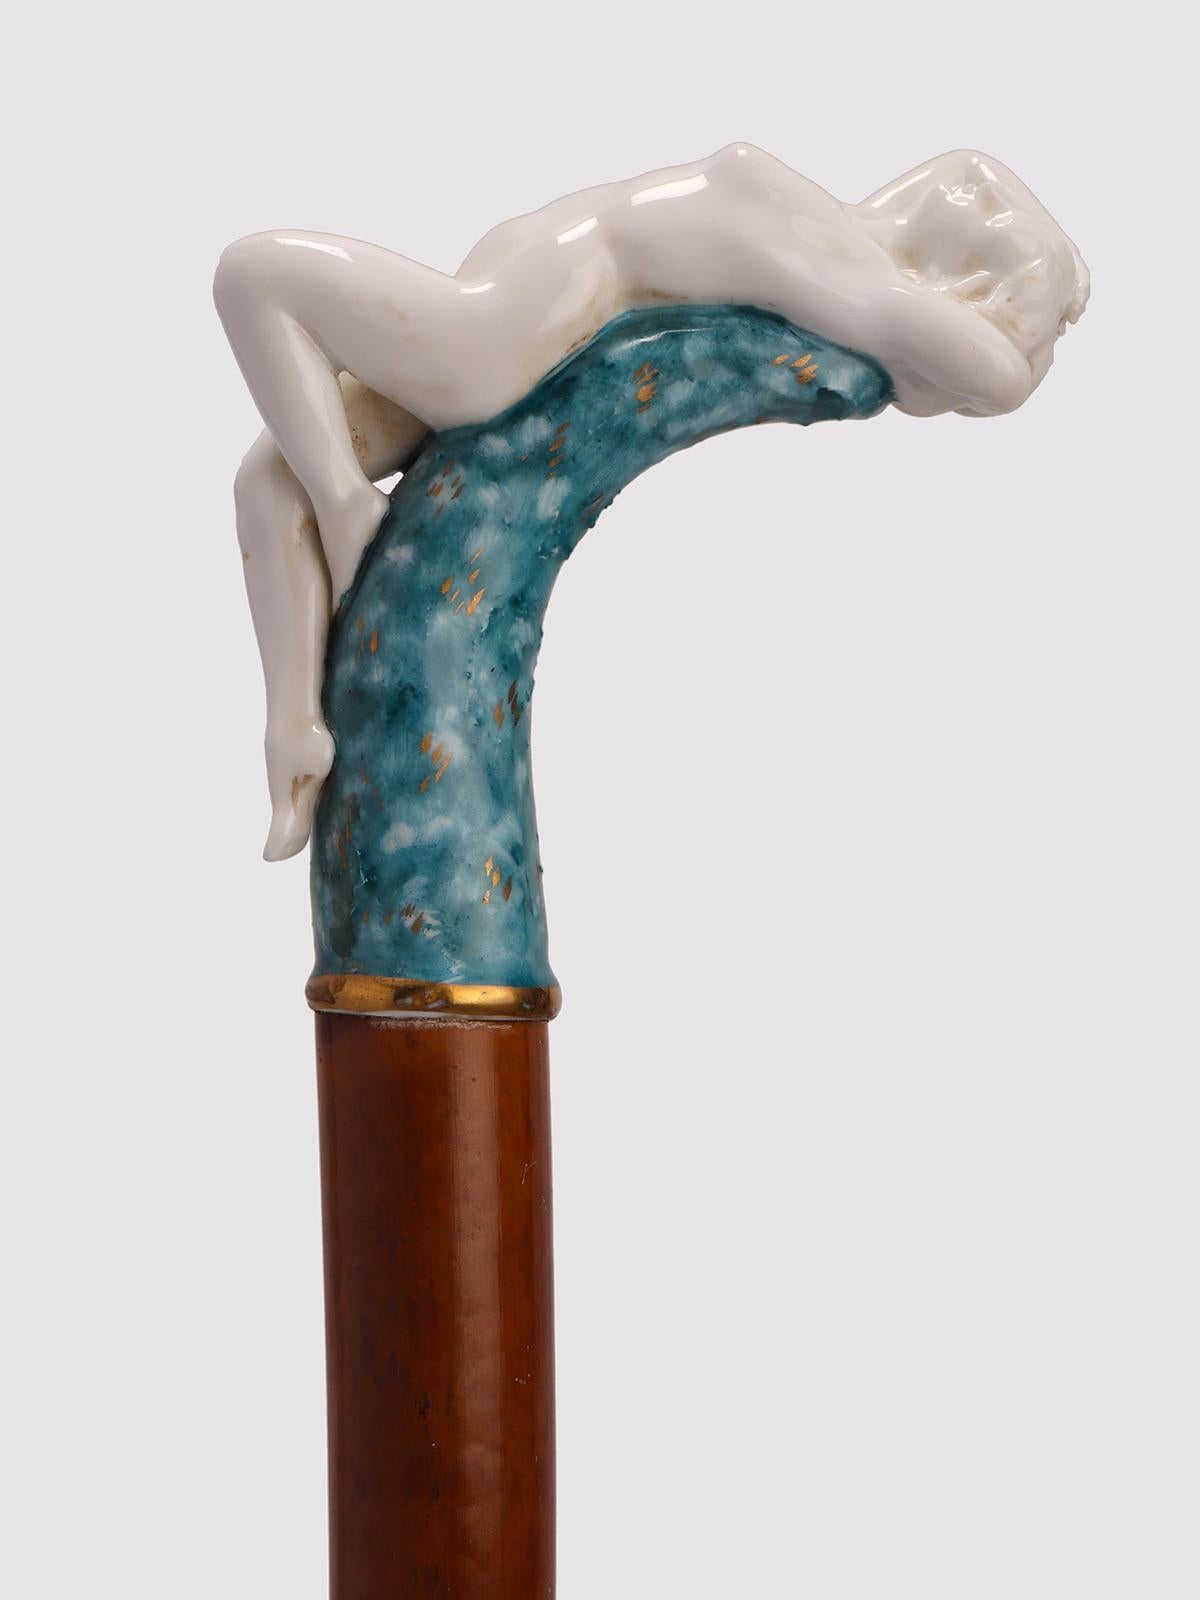 Walking stick with porcelain knob, light spotted rattan wood shaft, iron and brass ferrule. The knob has a curved profile, it is made of porcelain. It rises from the stem with a ring, and has a curvilinear profile, underlined in gold. The handle is